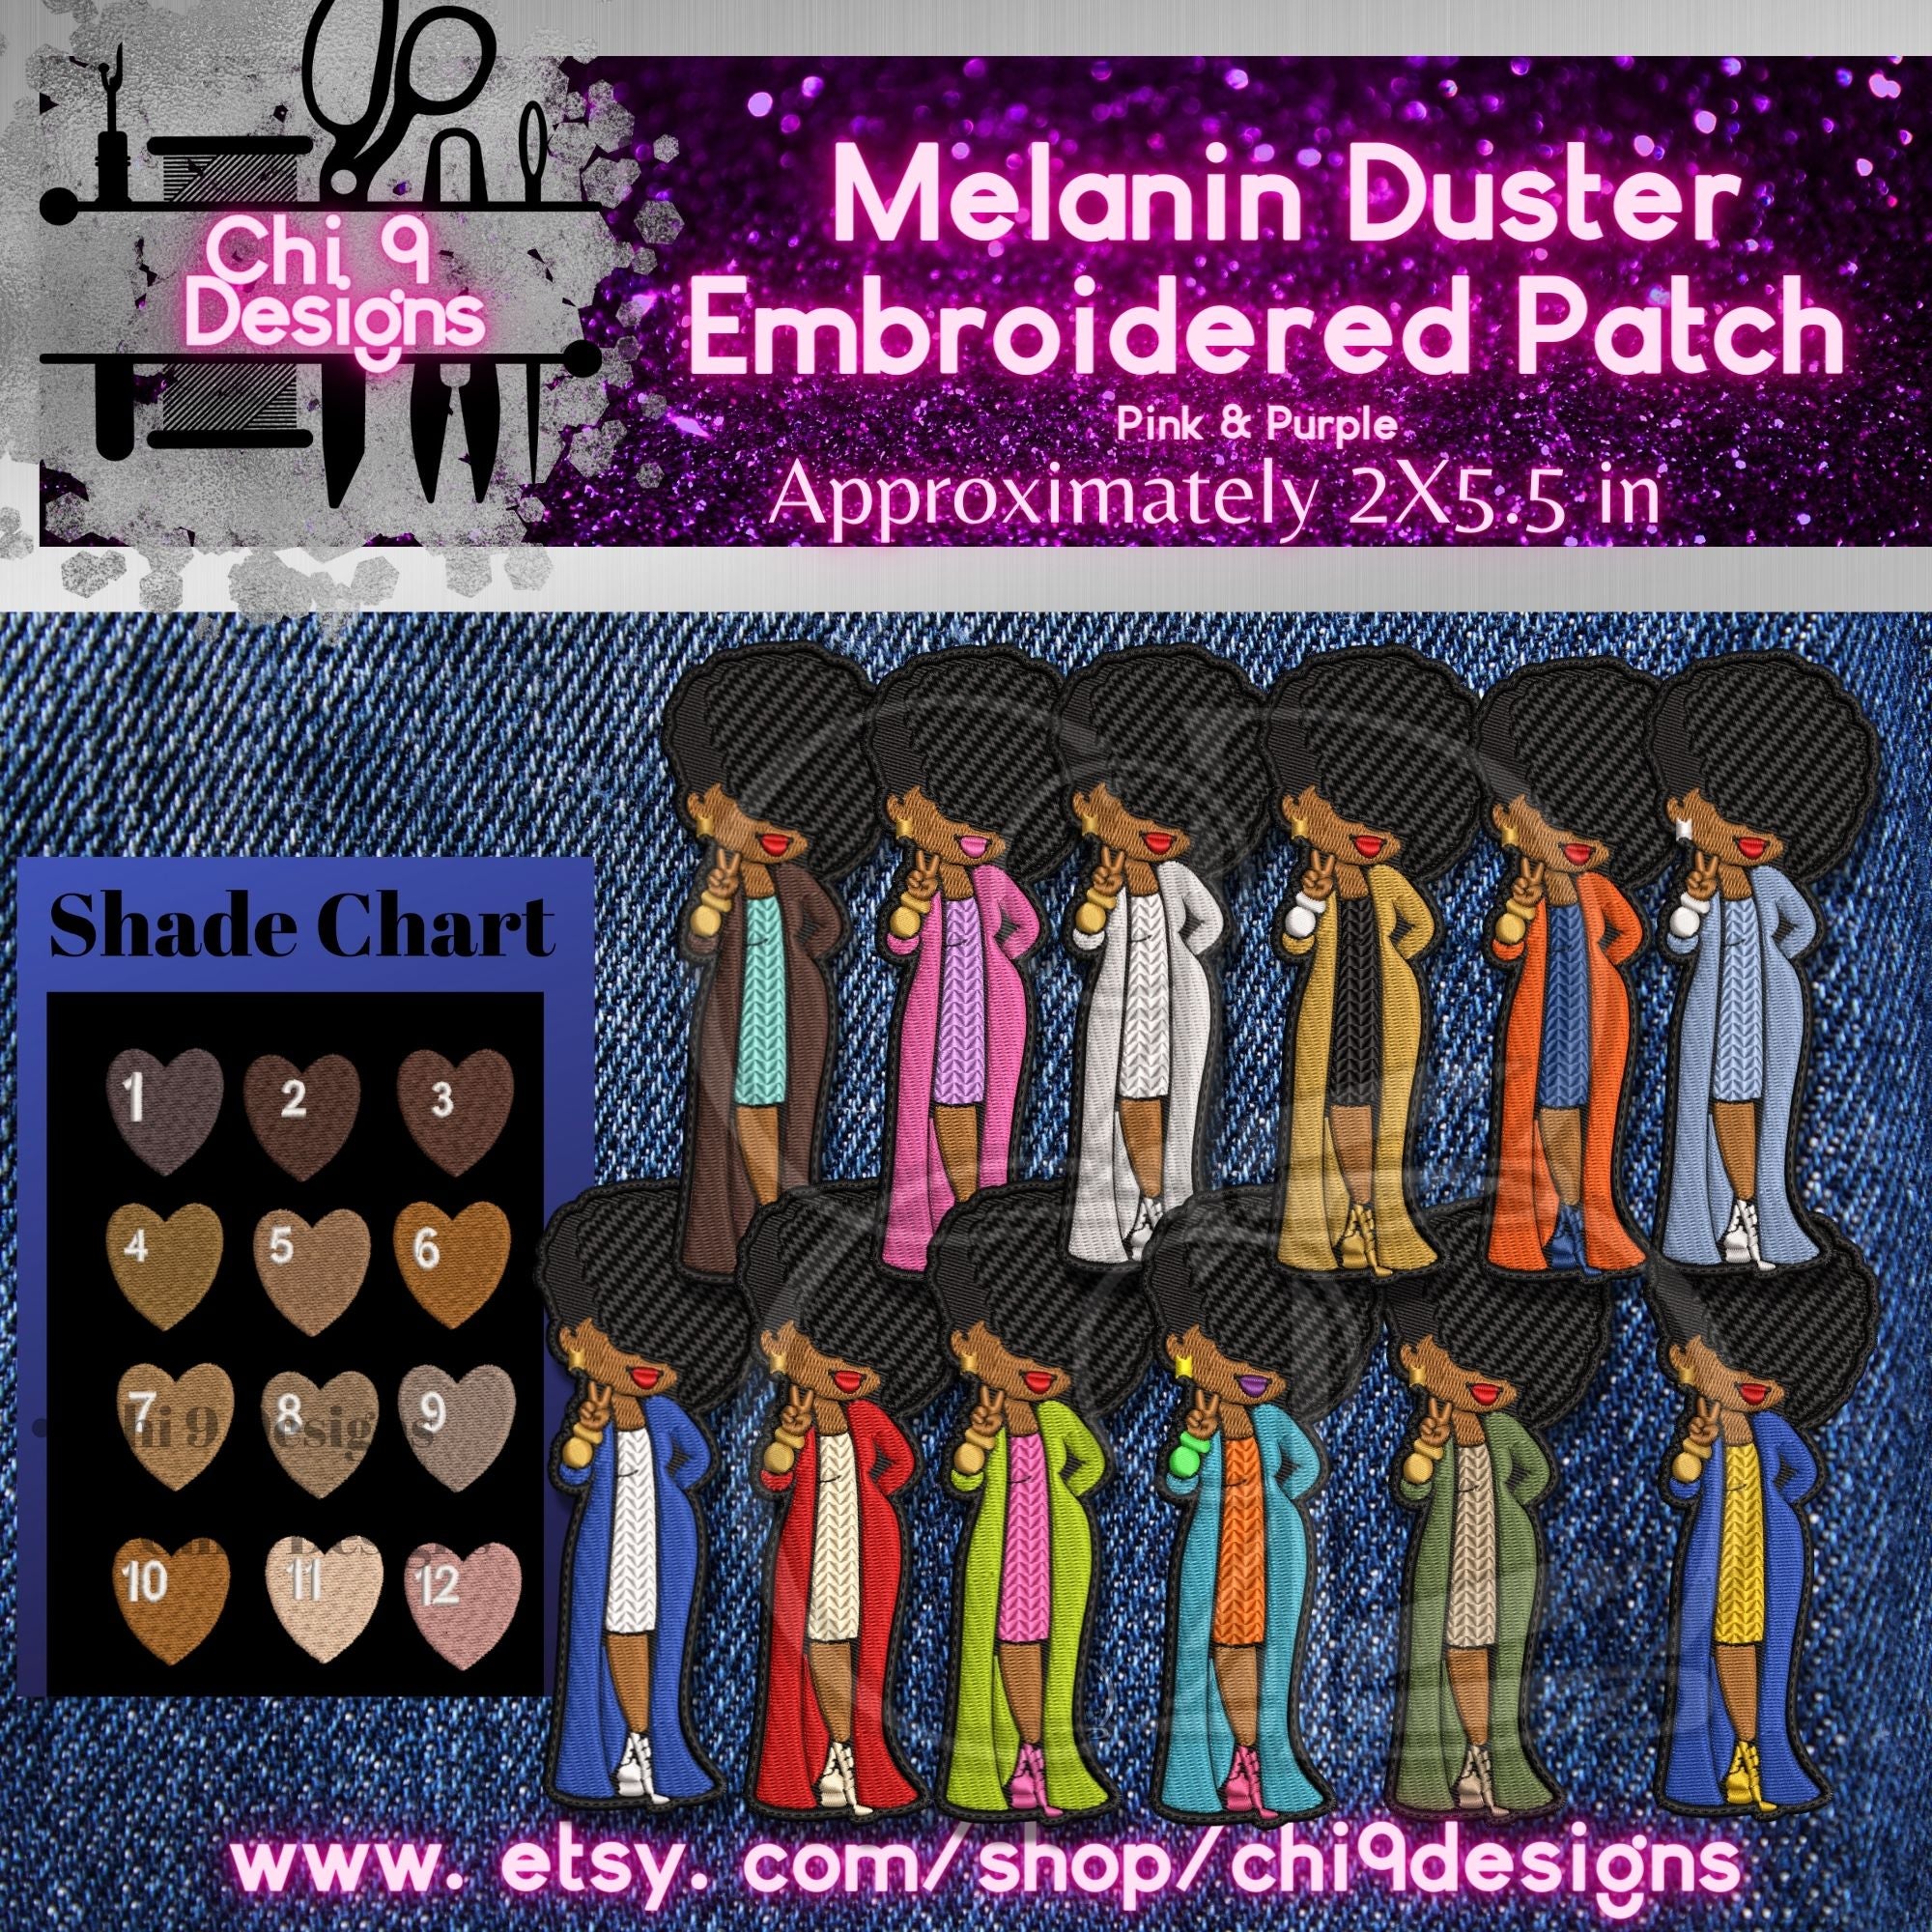 Melanin Duster Embroidered Patch with Orange and Blue Colored Clothes